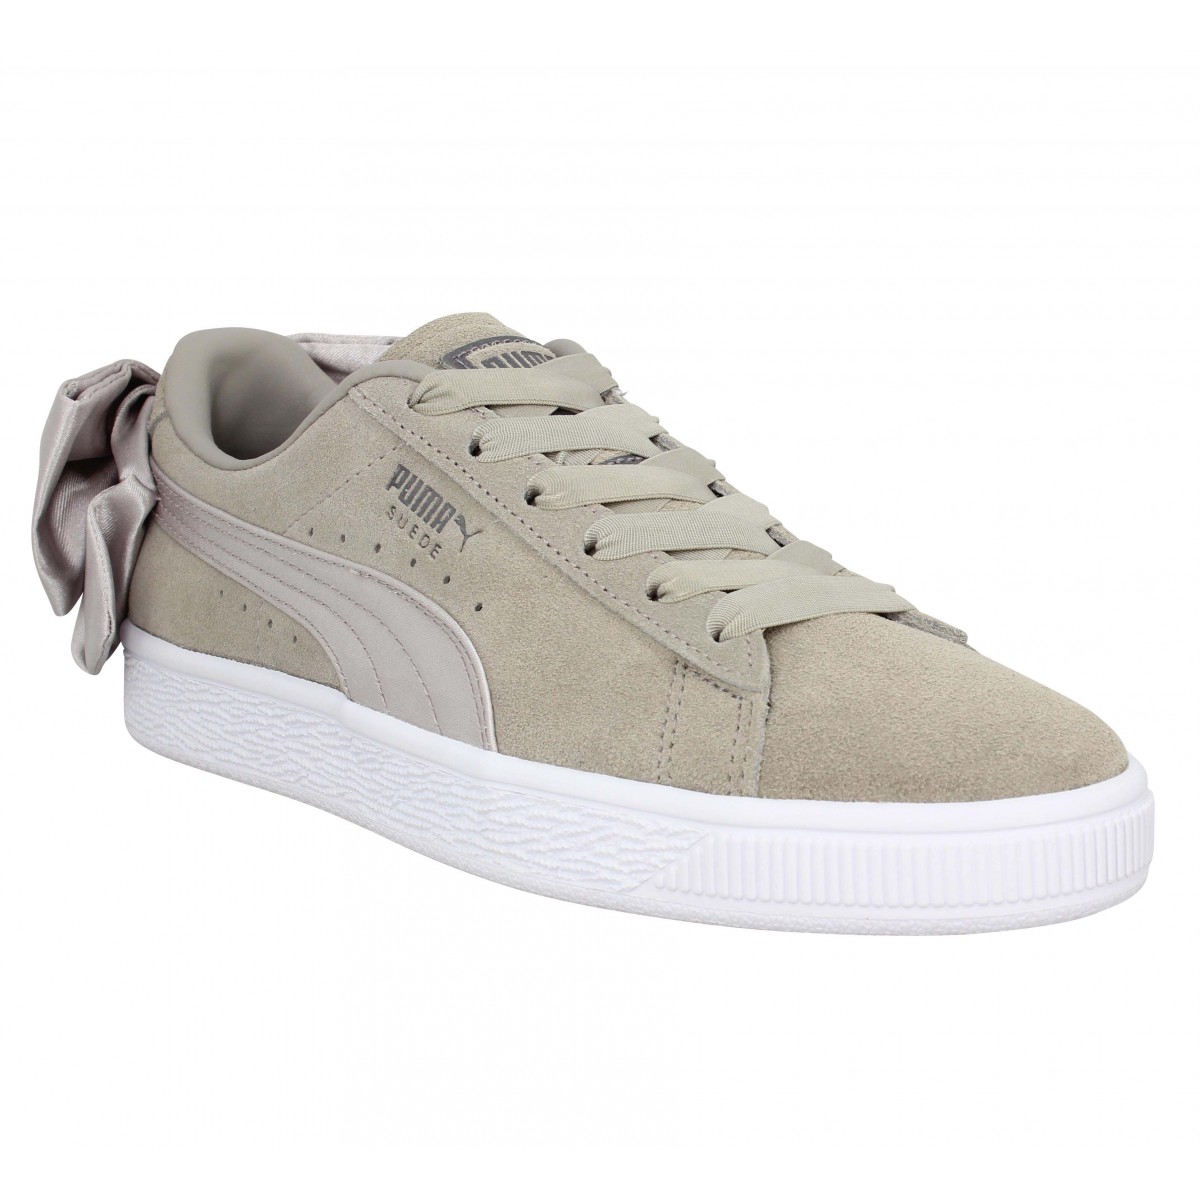 puma suede bow femme chaussures